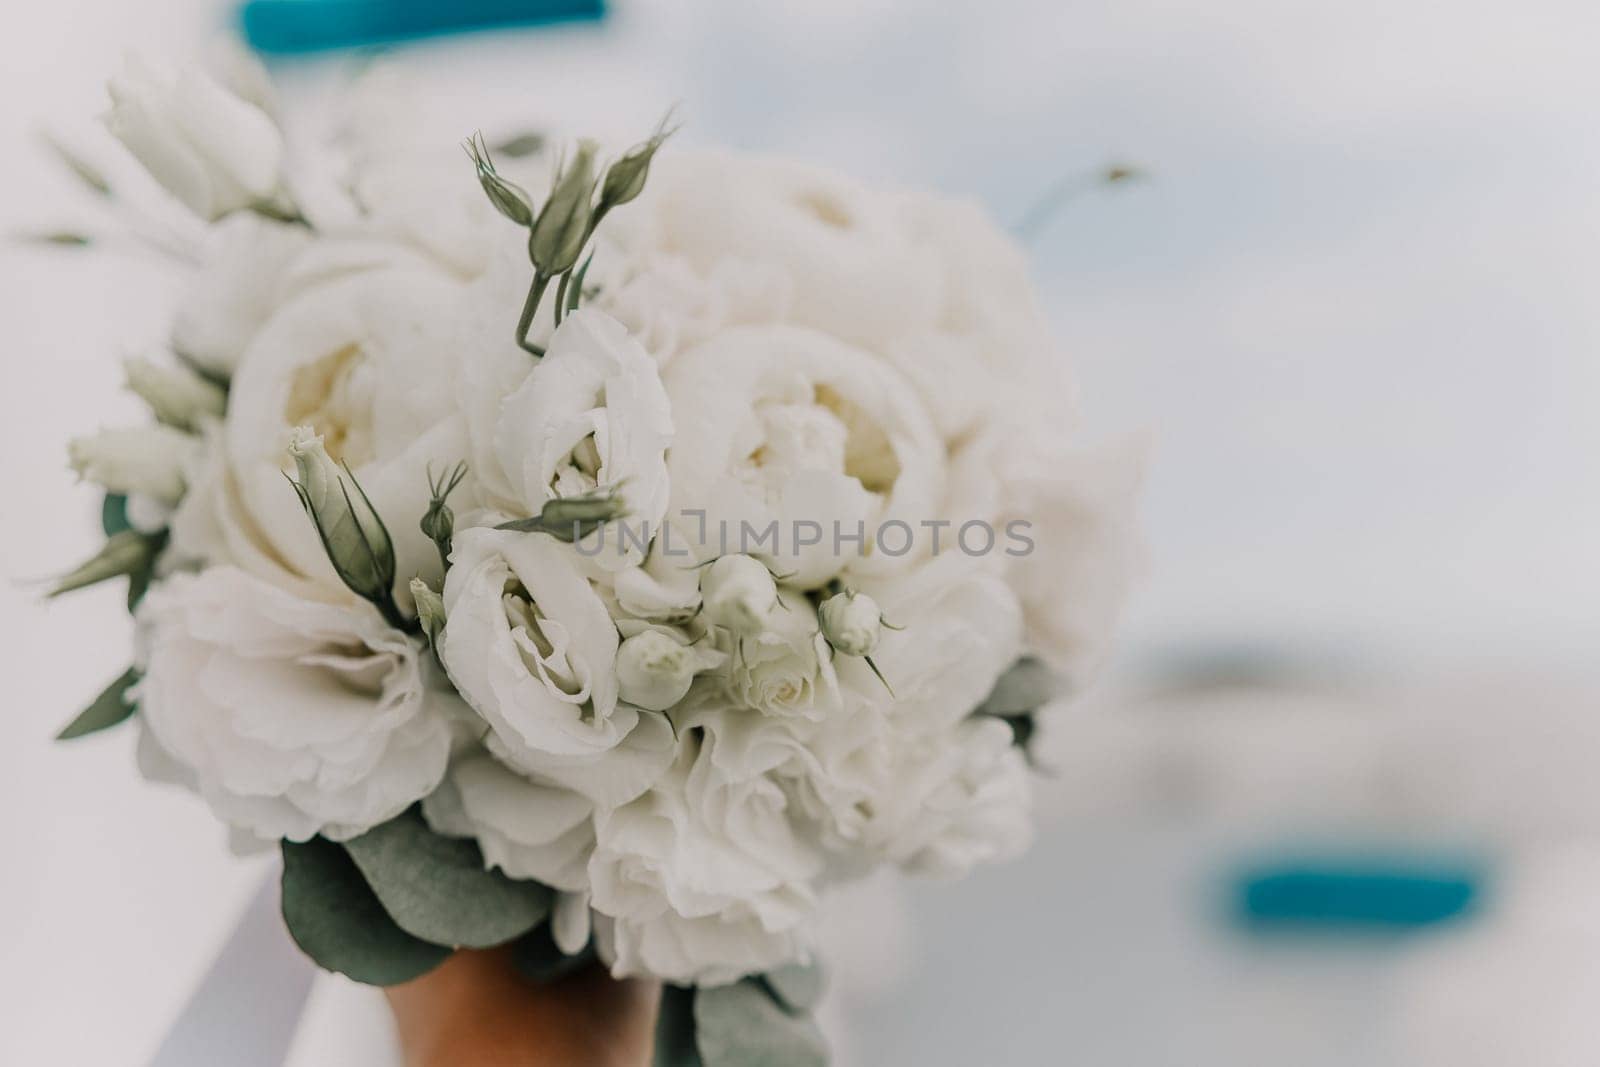 A bouquet of white flowers is being held by a person. The flowers are arranged in a way that they look like they are in a vase. The bouquet is the main focus of the image